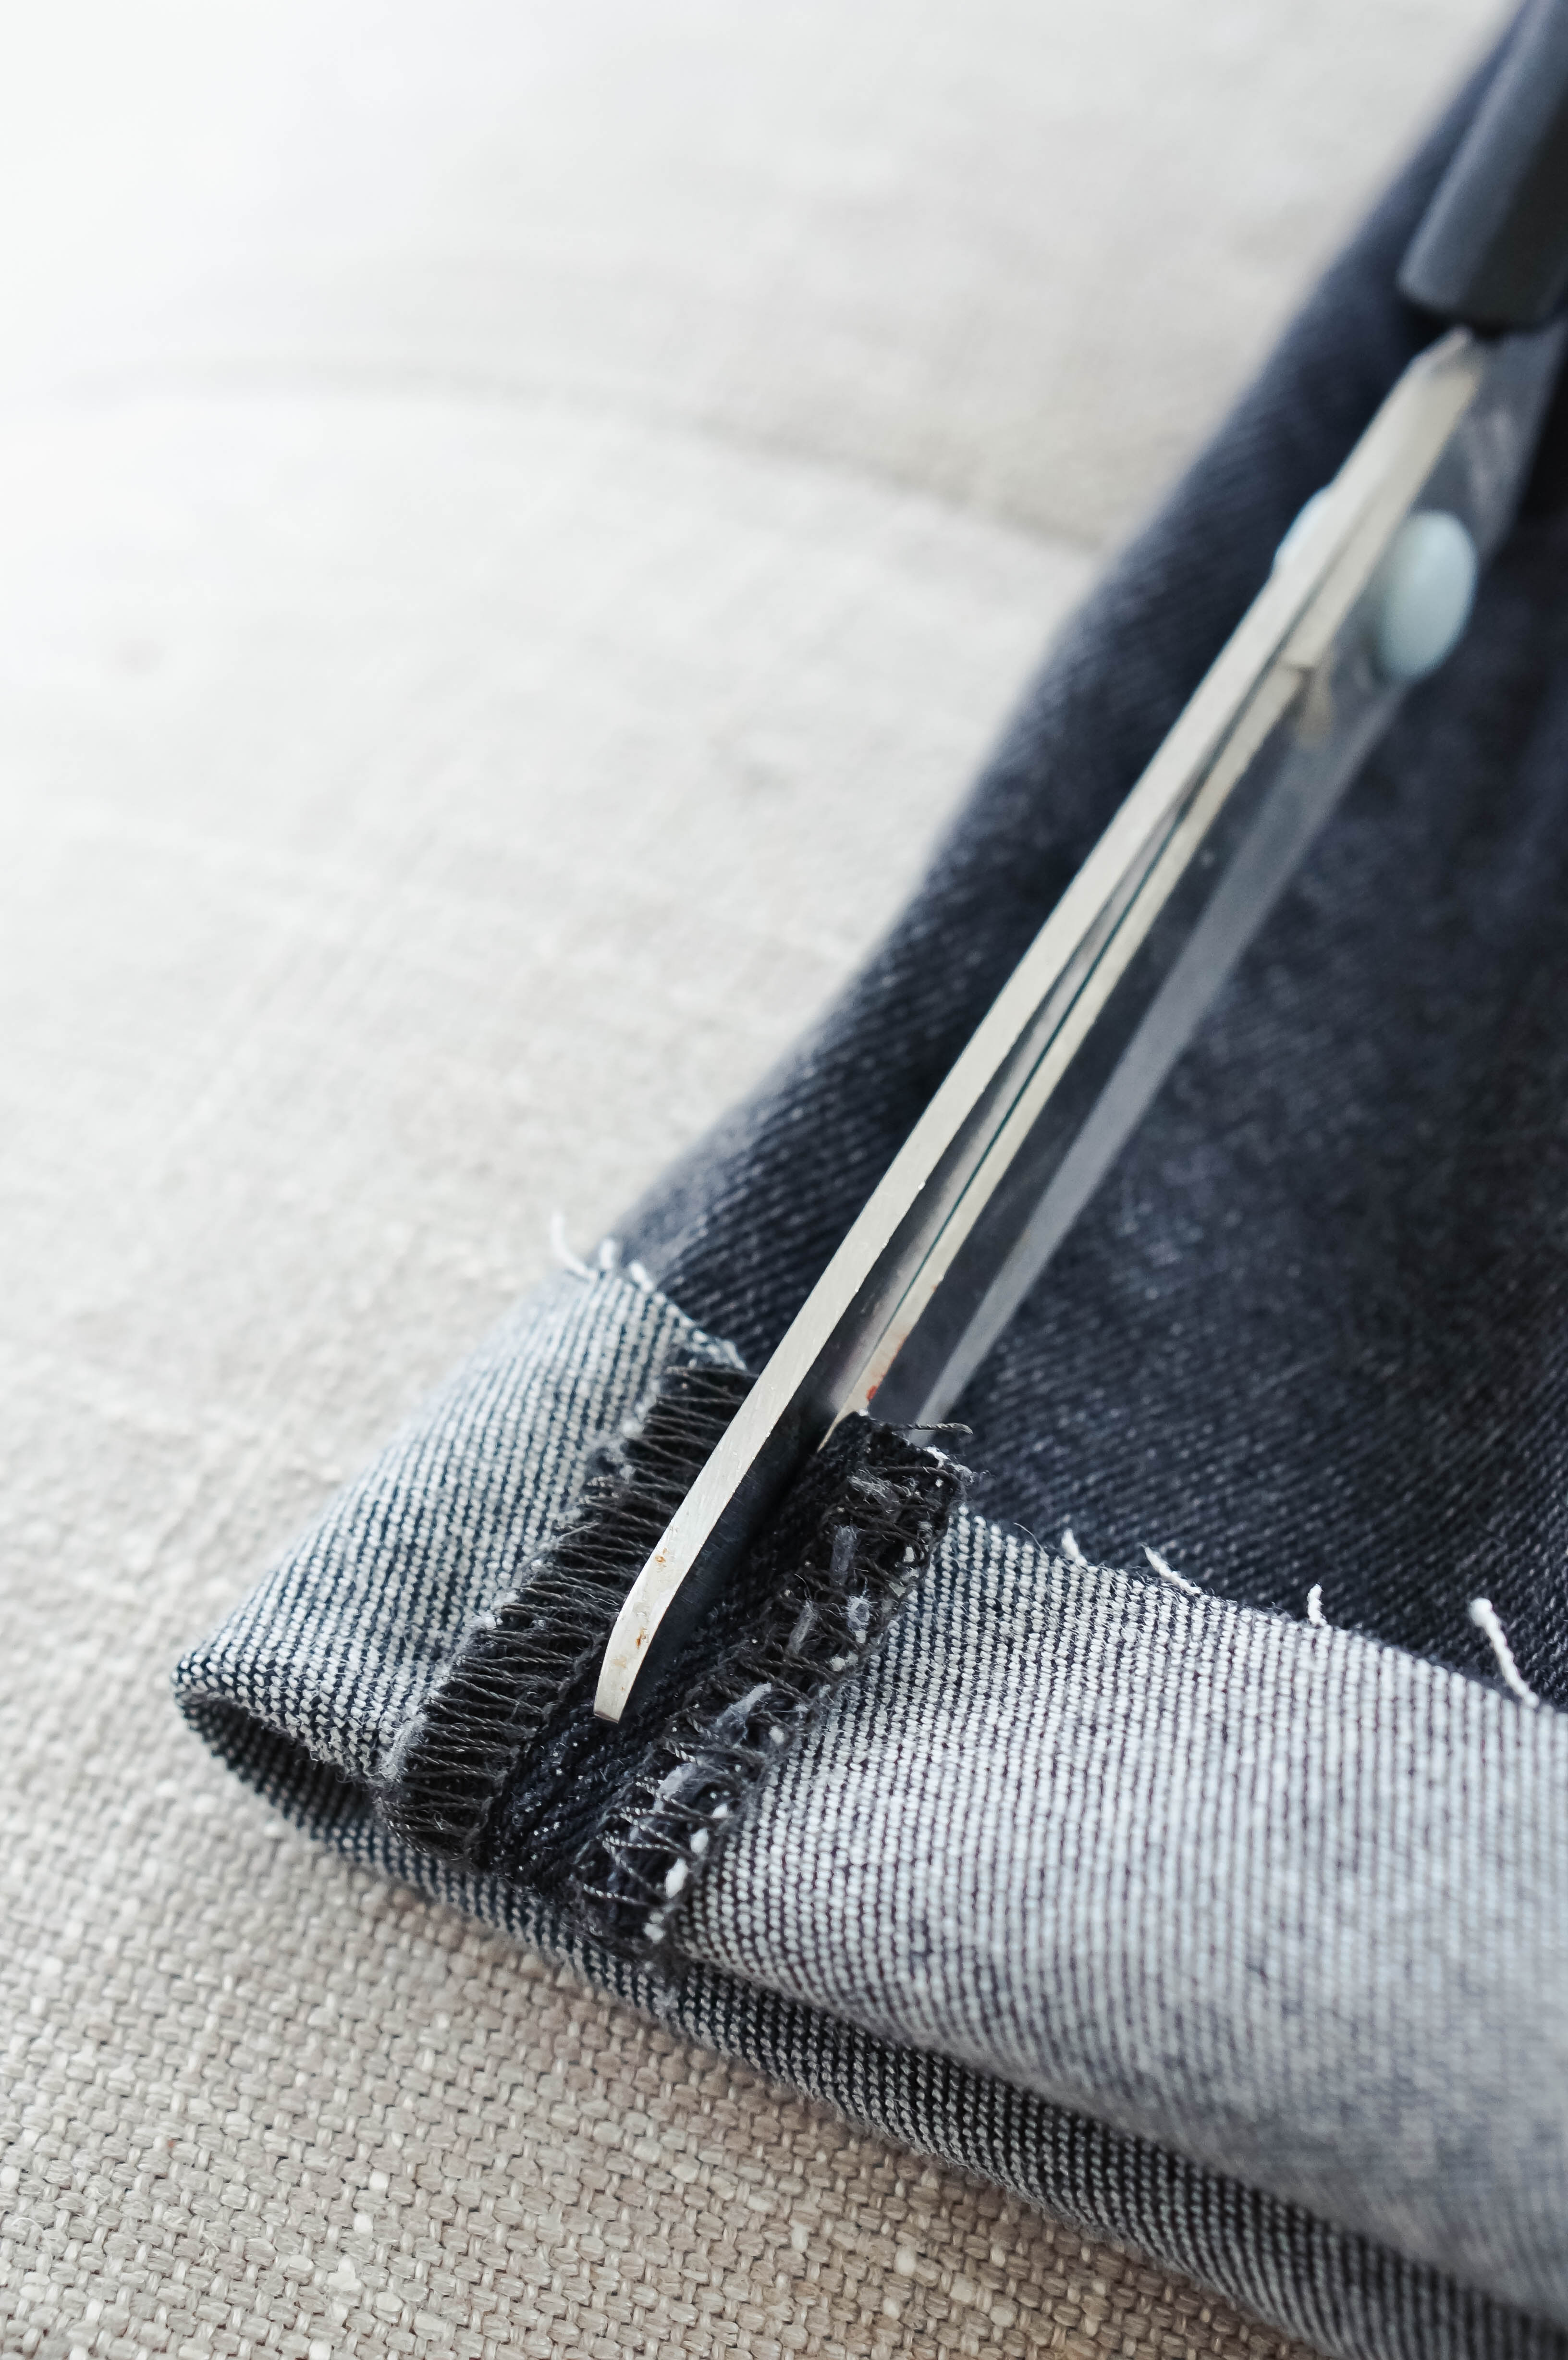 How to cut the hem off jeans